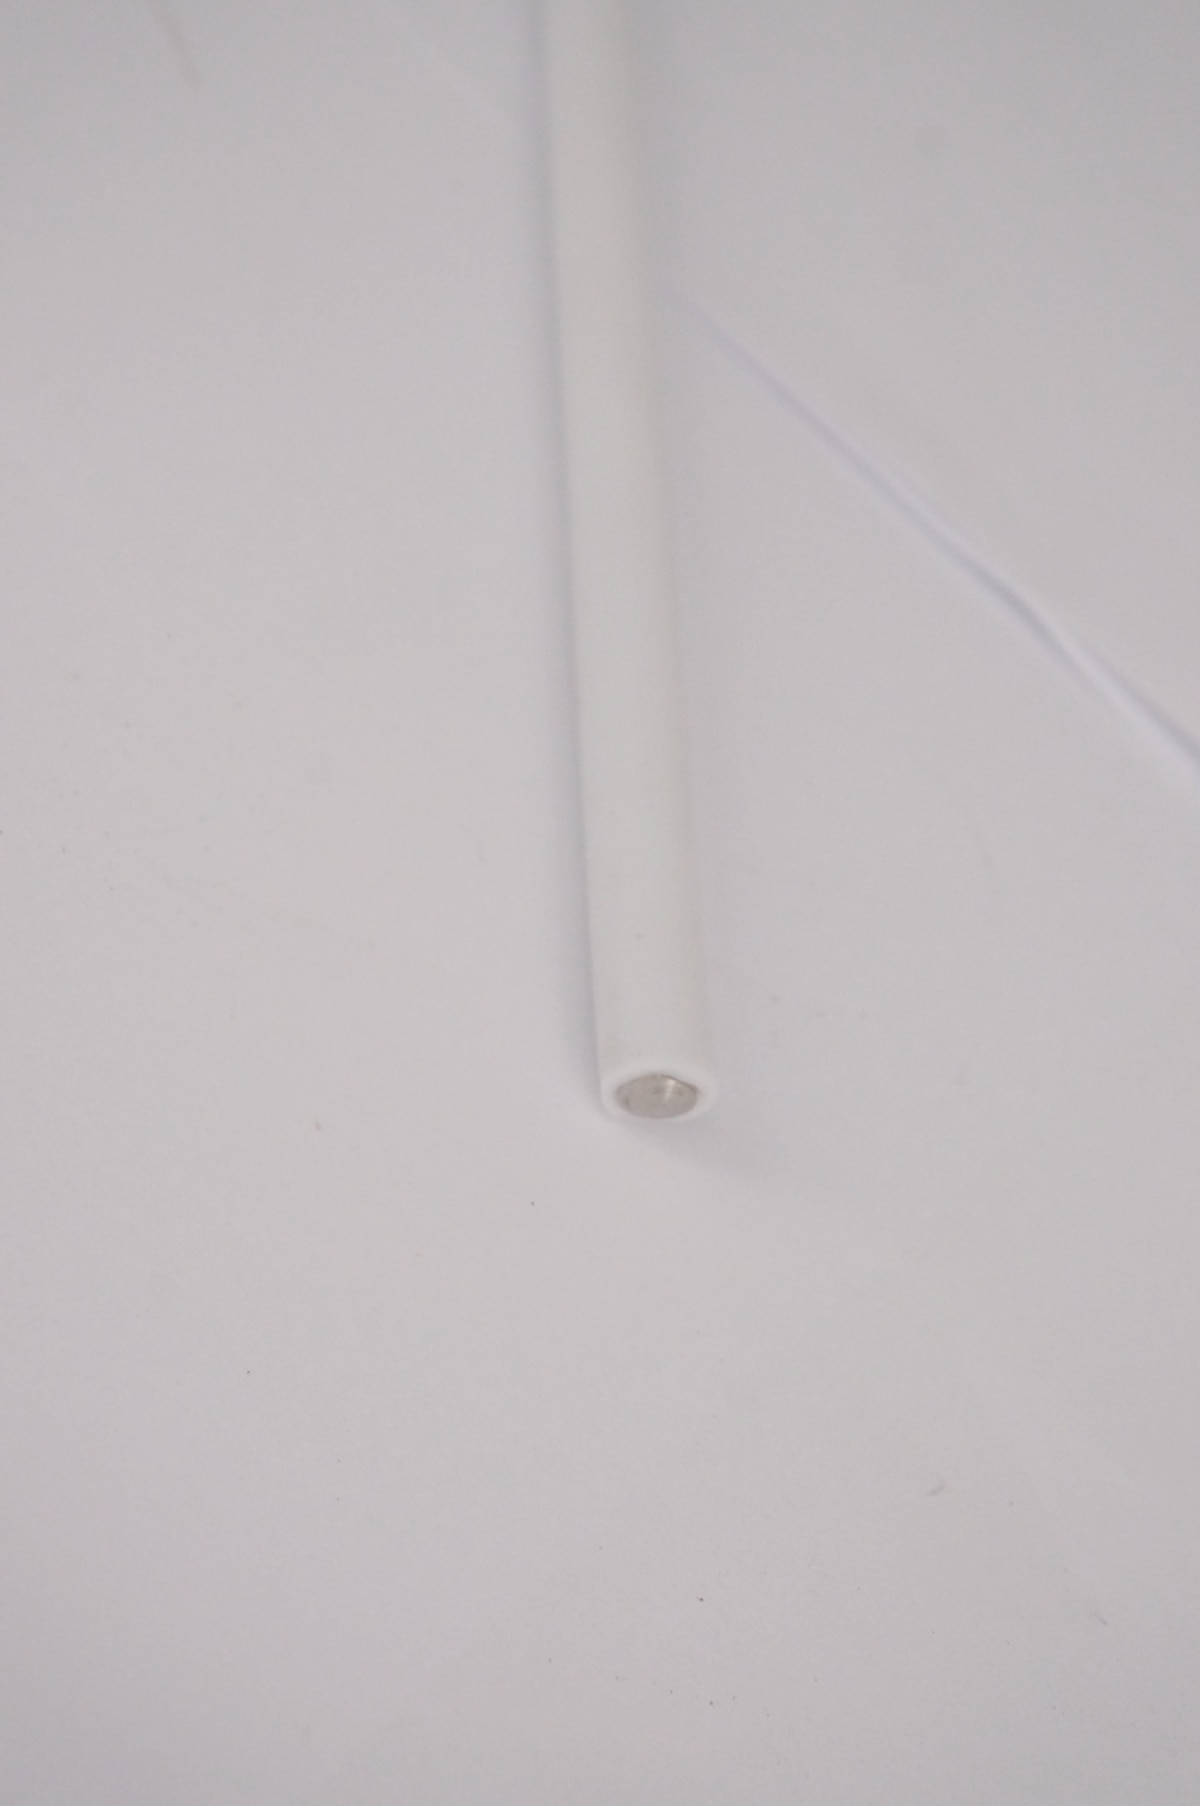 PTFE 250mm To 500mm Stirring Paddle Stirring Potstick Rods For School Lab Experiment 4